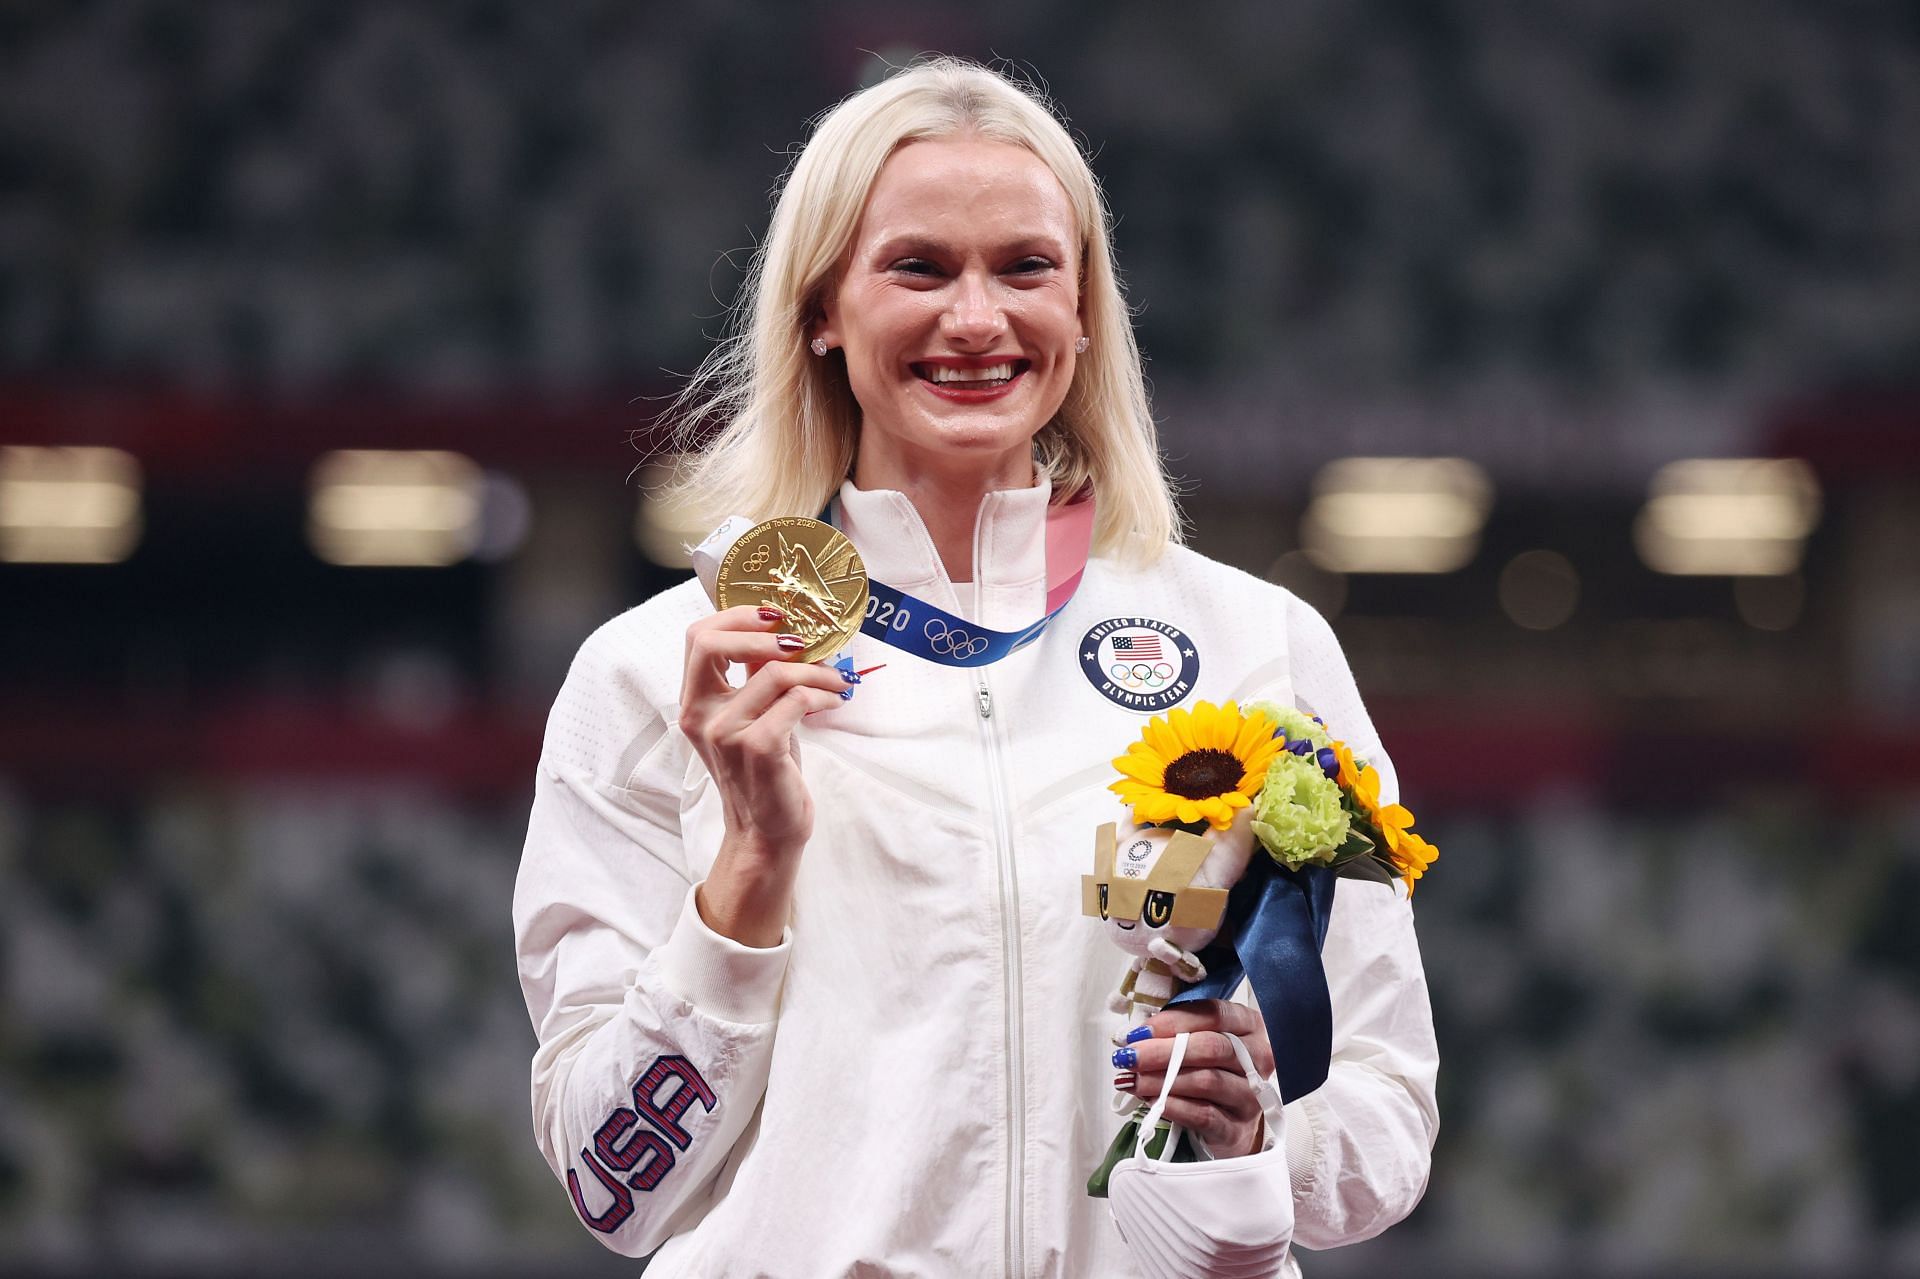 Katie Moon holds up her medal on the podium during the medal ceremony for the Women&rsquo;s Pole Vault during the 2020 Olympic Games in Tokyo, Japan.